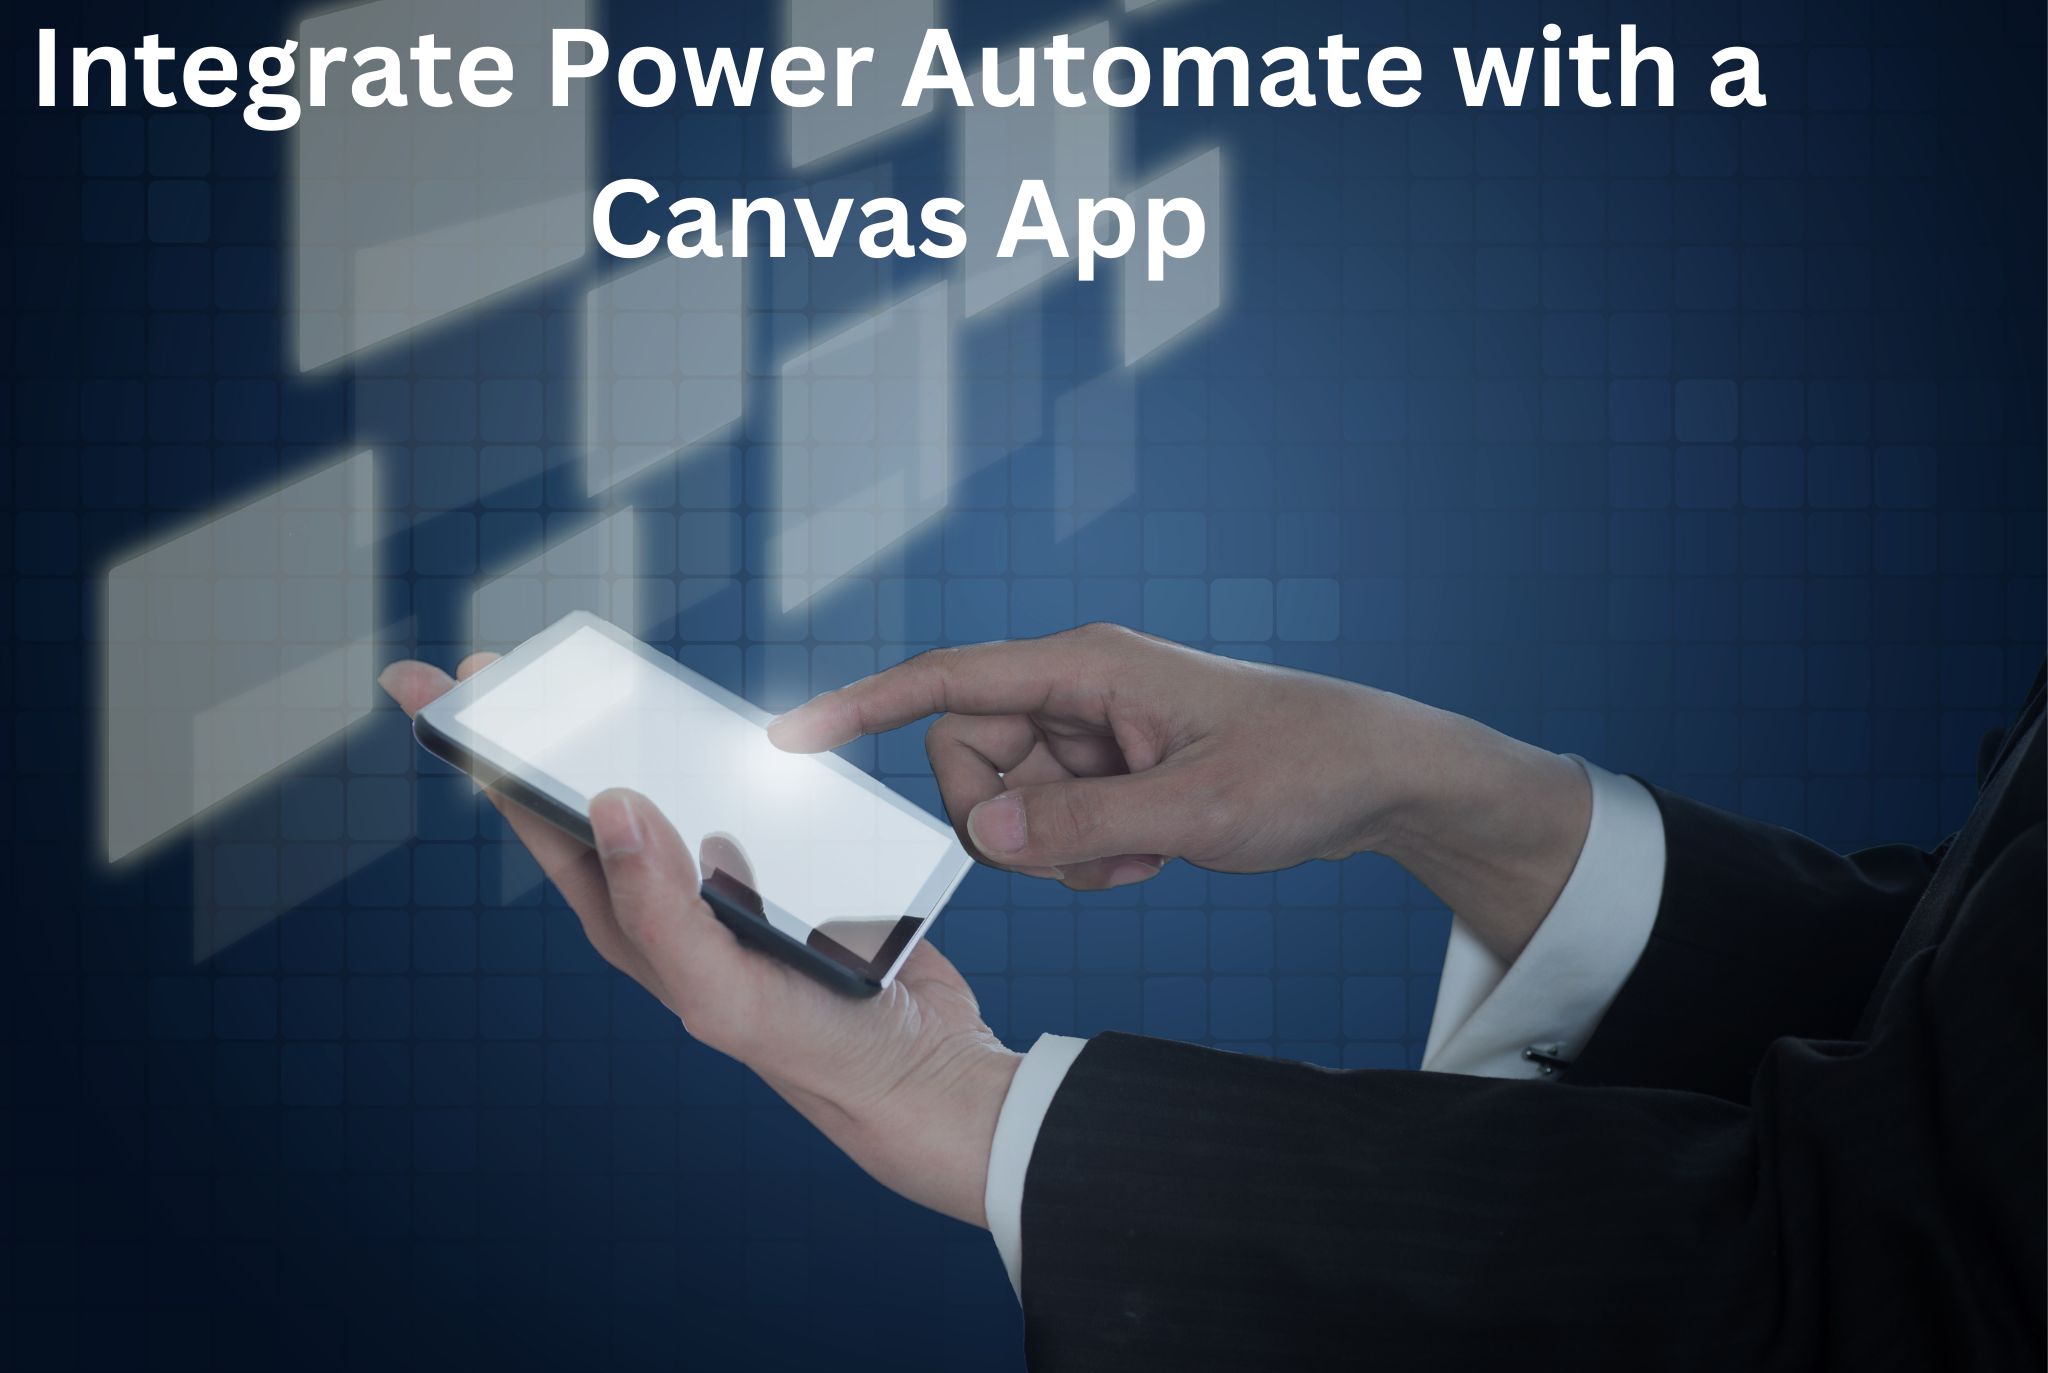 Integrate Power Automate with a Canvas App